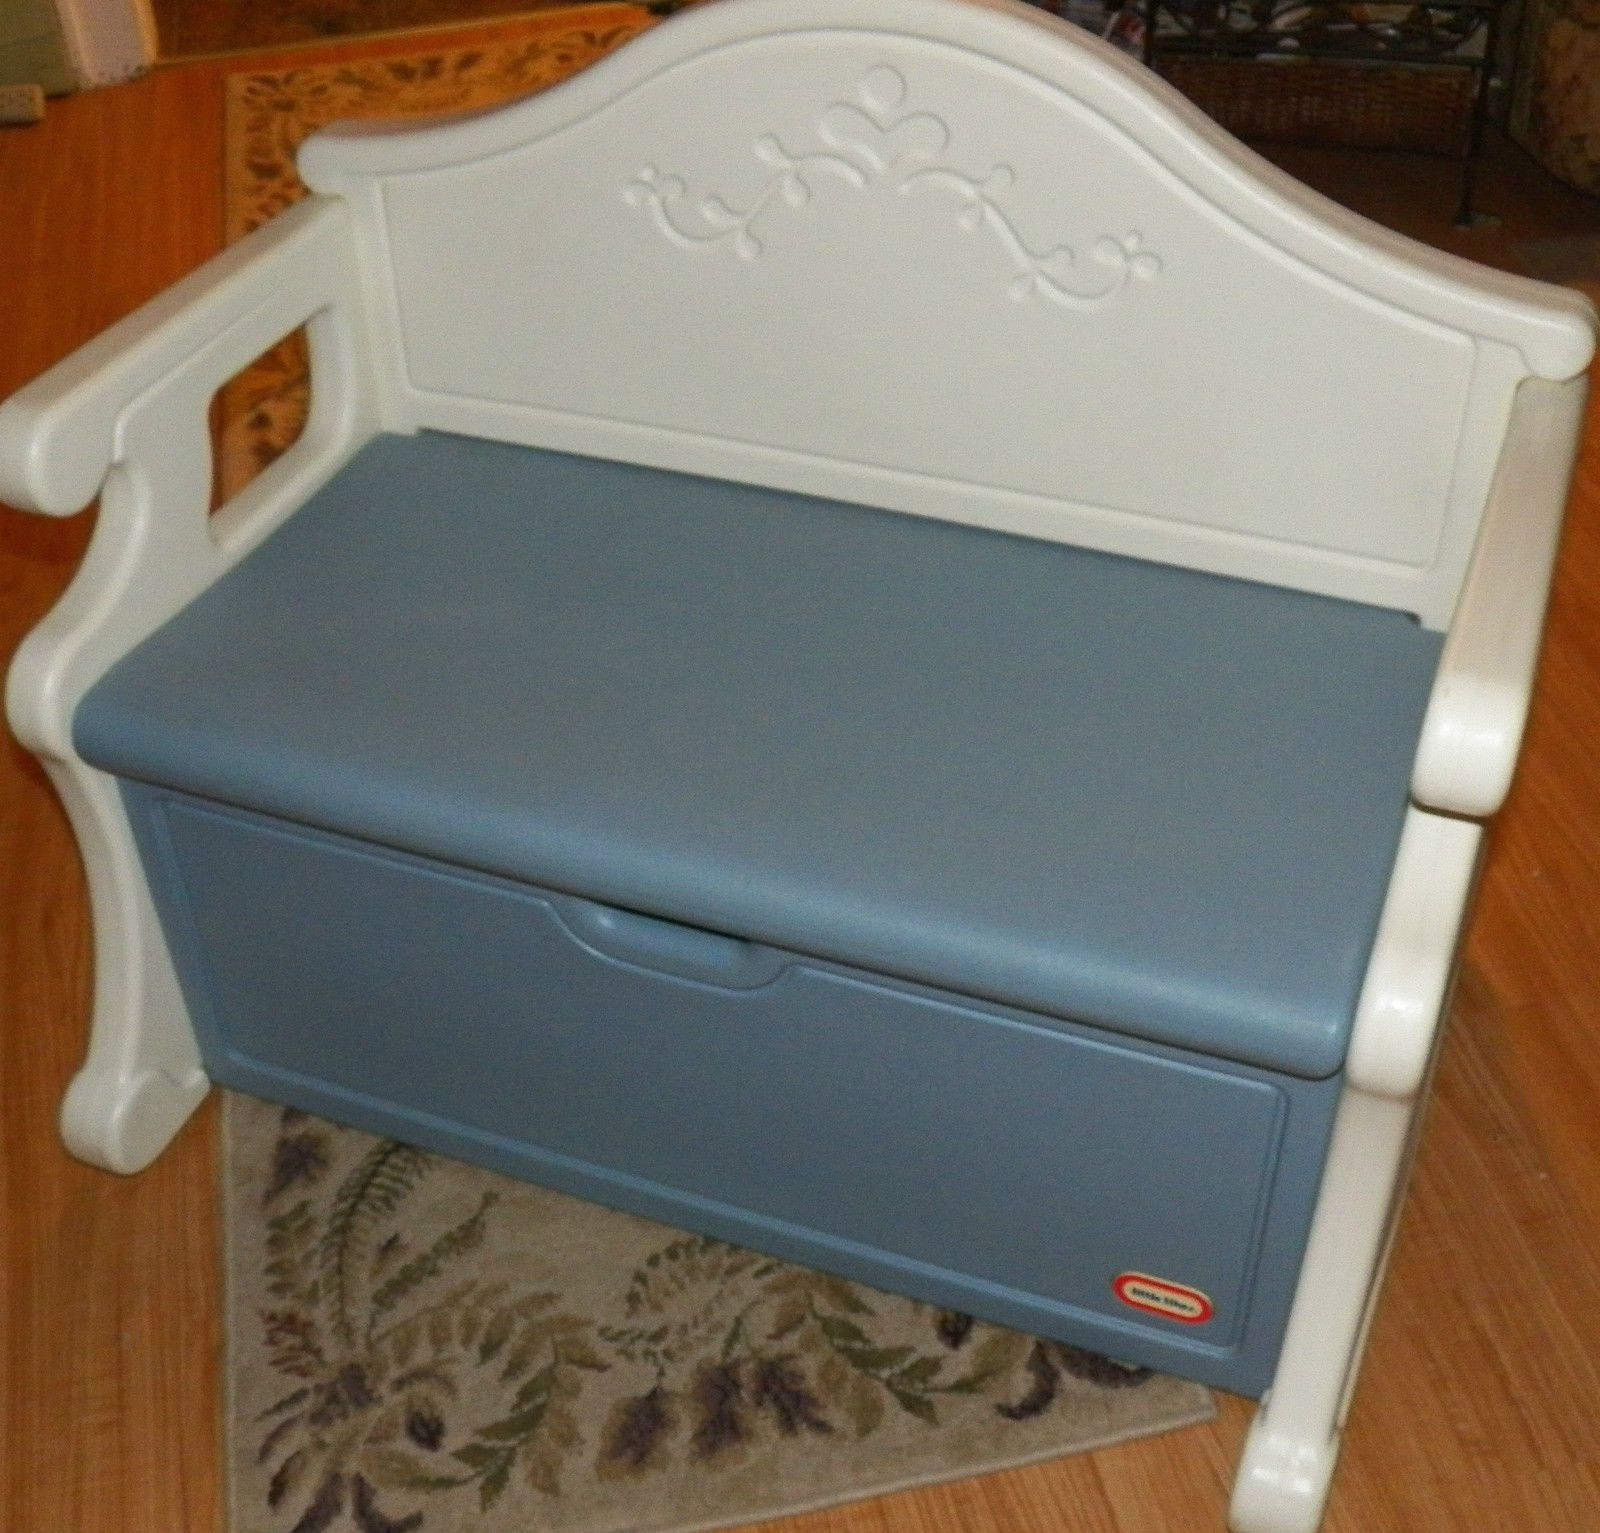 Little Tikes Storage Bench
 Little Tikes Bench Toy Box How cute will this be when I